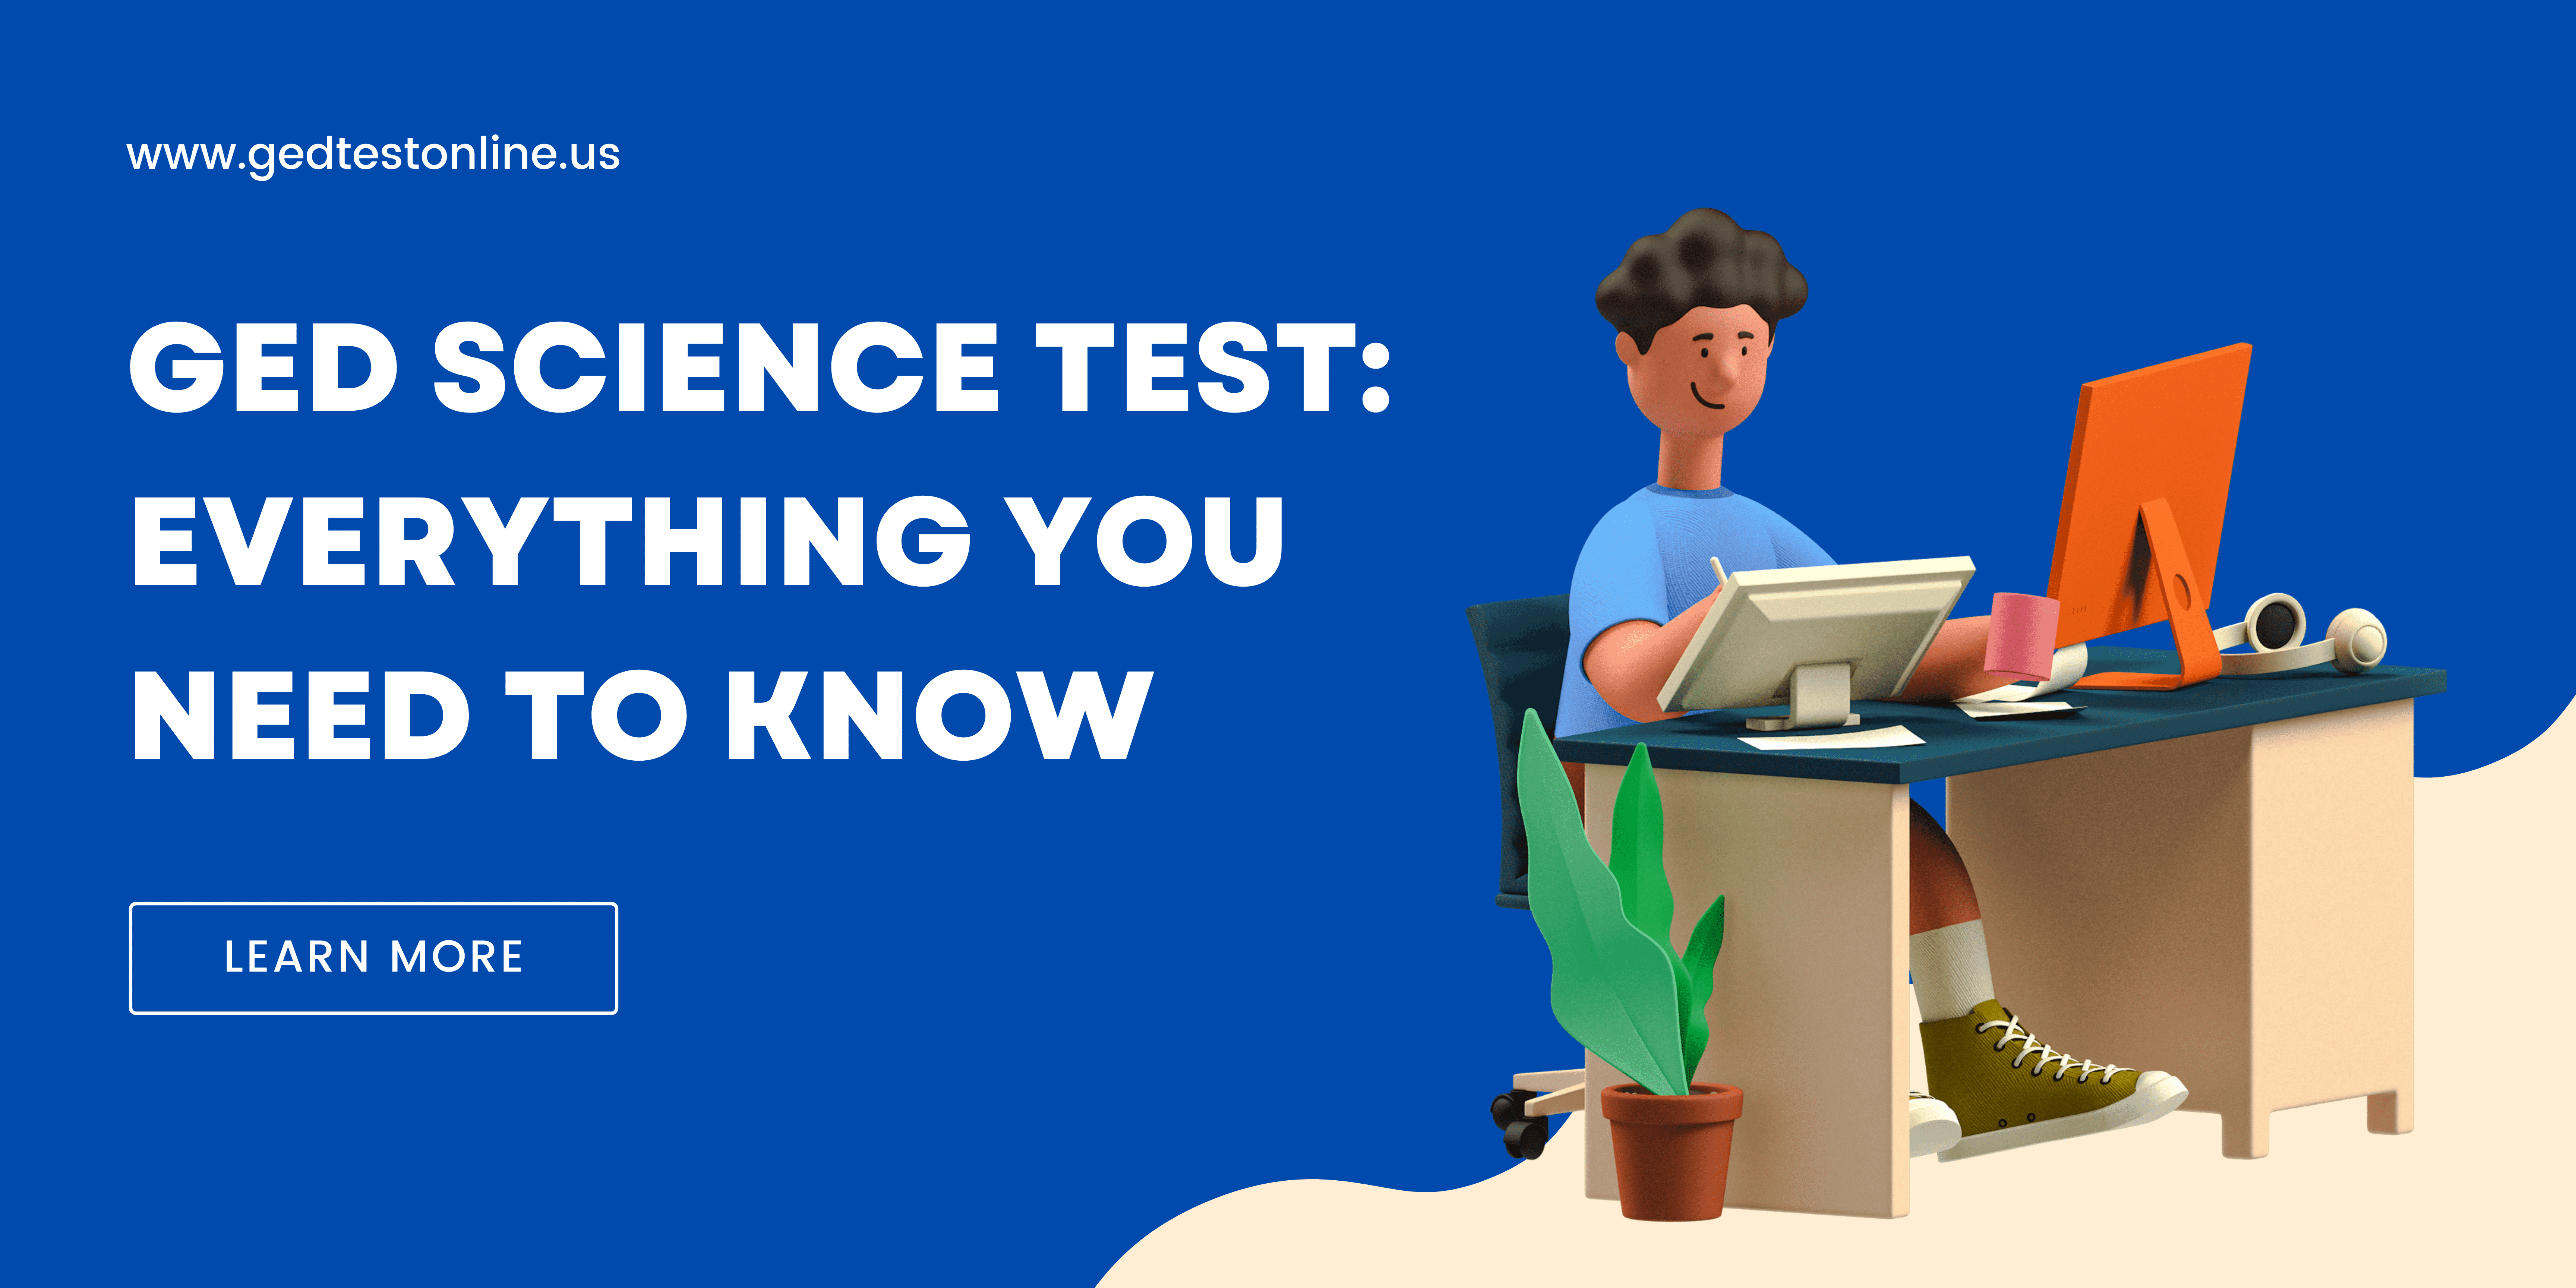 GED Science Test: Comprehensive Guide and Tips